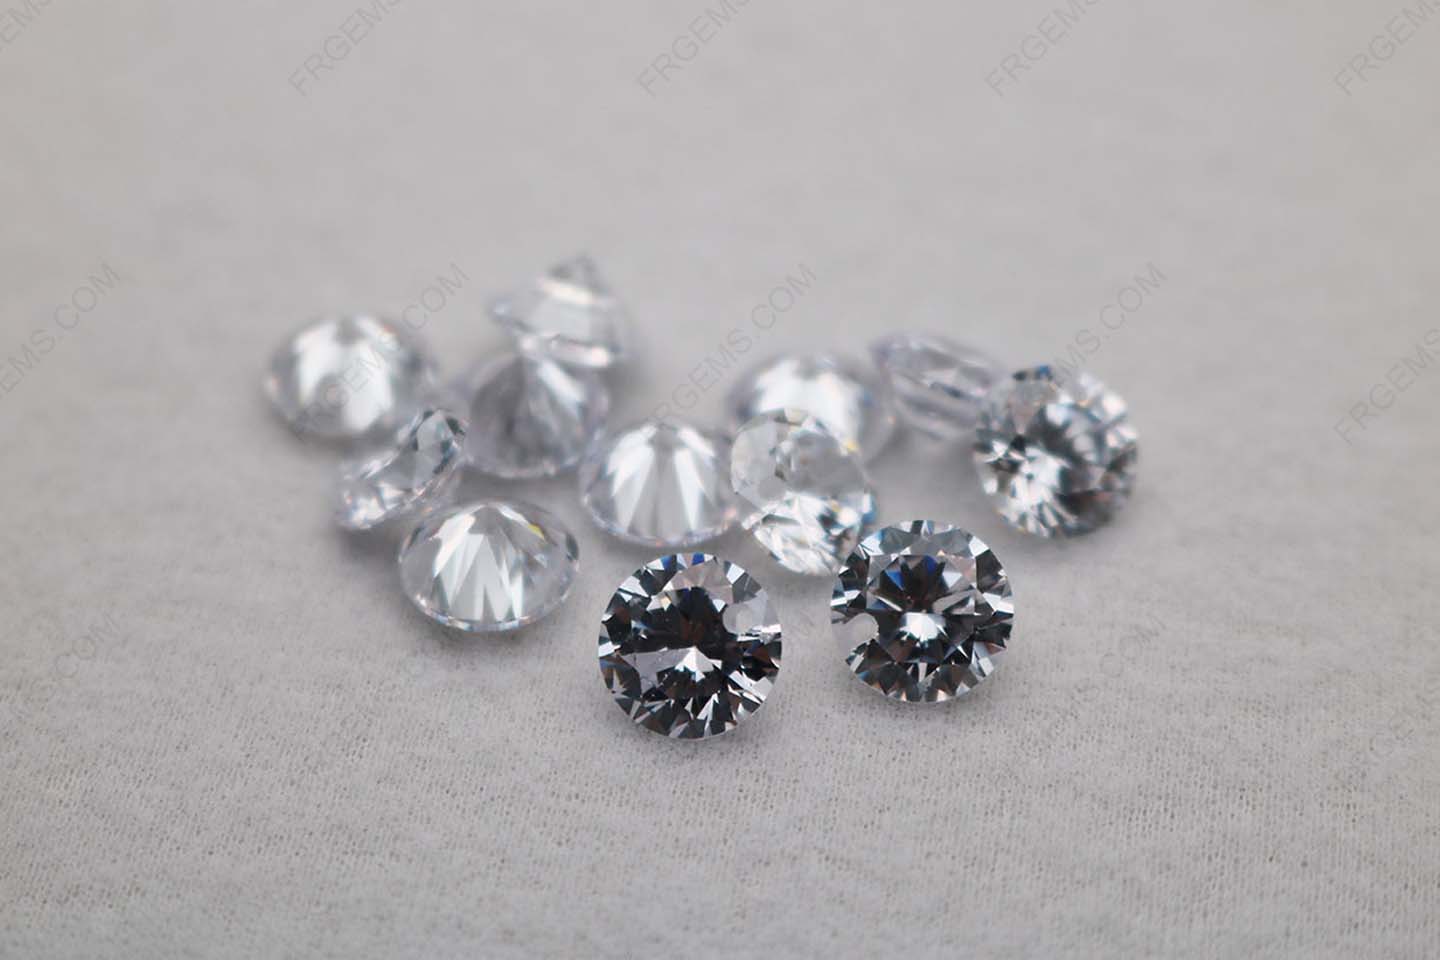 Cubic Zirconia White Color Round Shape Faceted diamond Cut 8mm stones CZ01 IMG_0994